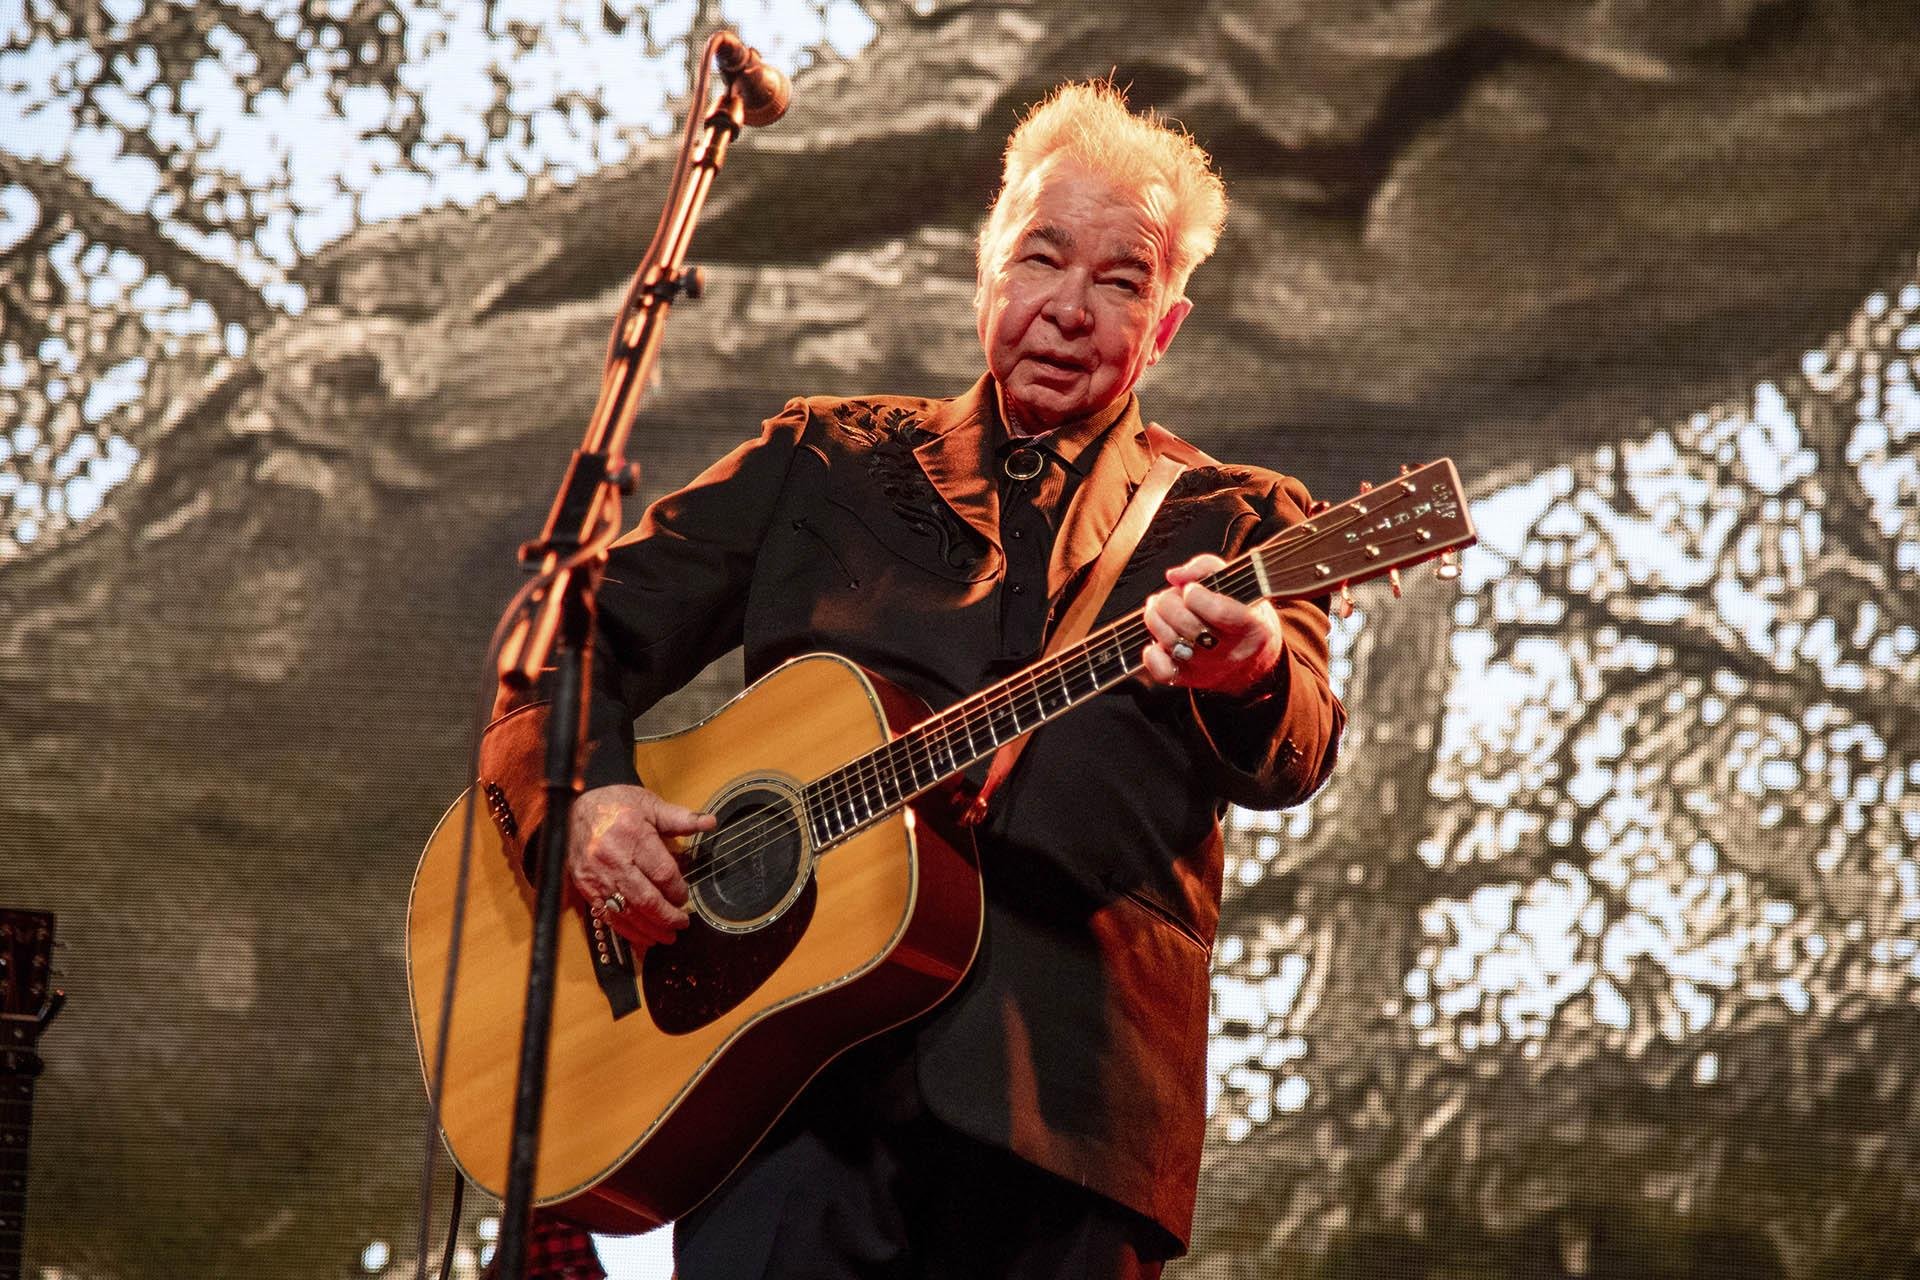 This June 15, 2019 file photo shows John Prine performing at the Bonnaroo Music and Arts Festival in Manchester, Tennessee. (Photo by Amy Harris / Invision / AP, File)